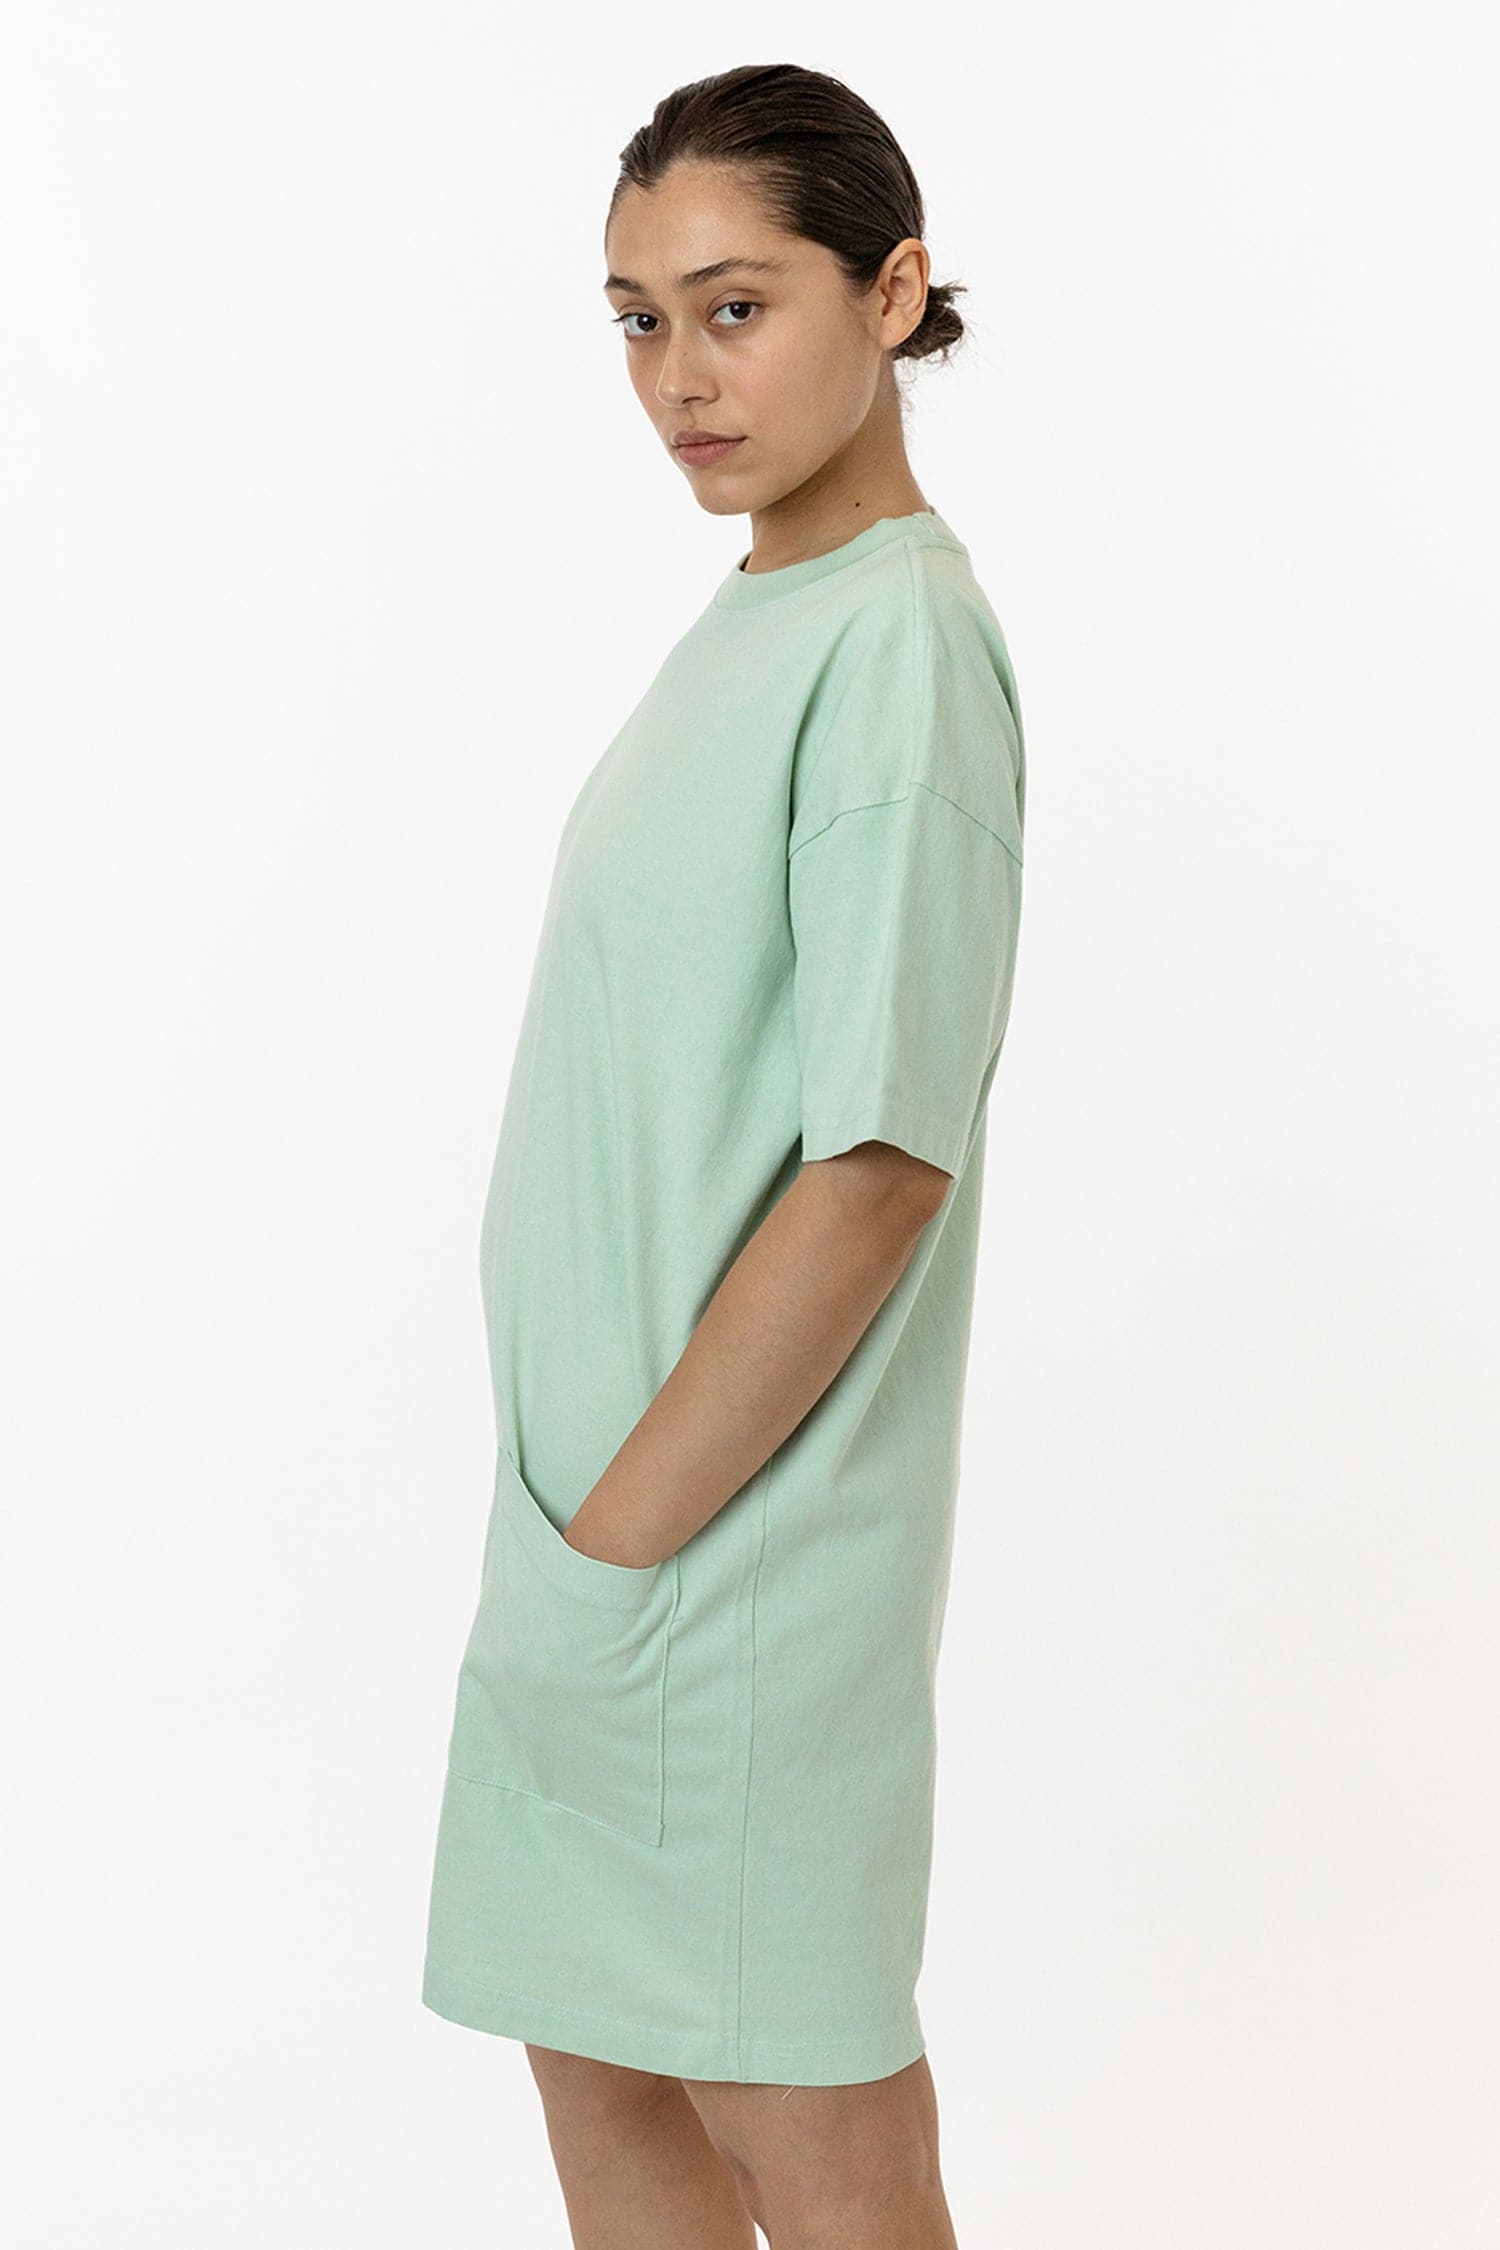 Topshop oversized jersey tank in green